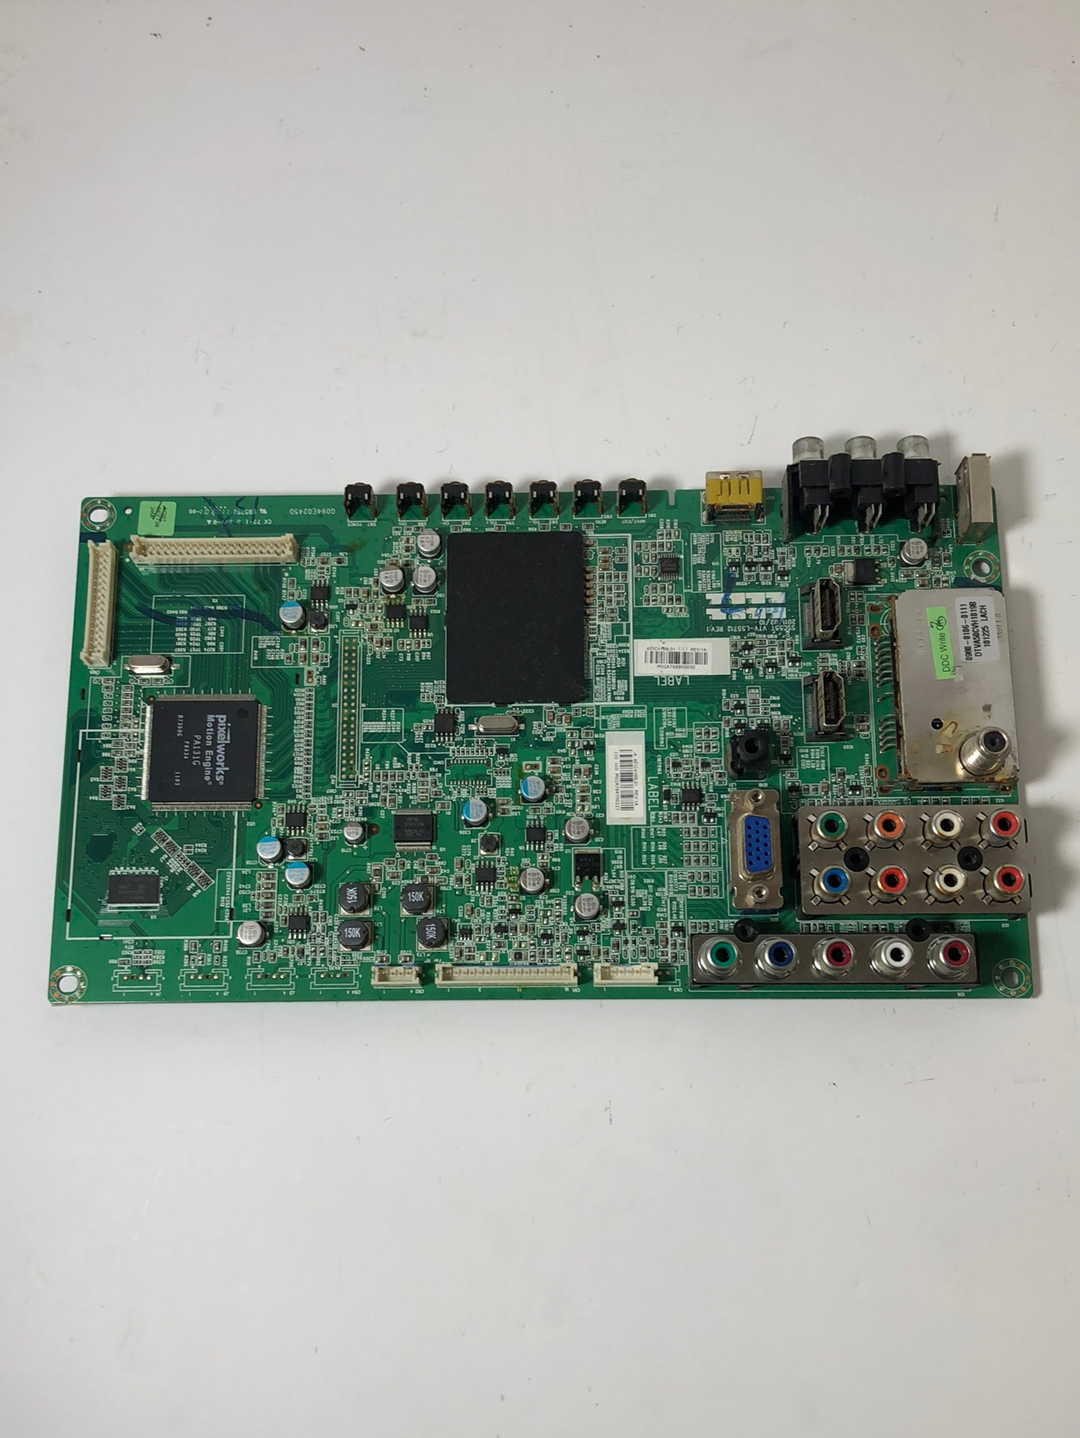 Sanyo CL461C4169L01 (431C4169L01) Main Board for DP55441 P55441-00